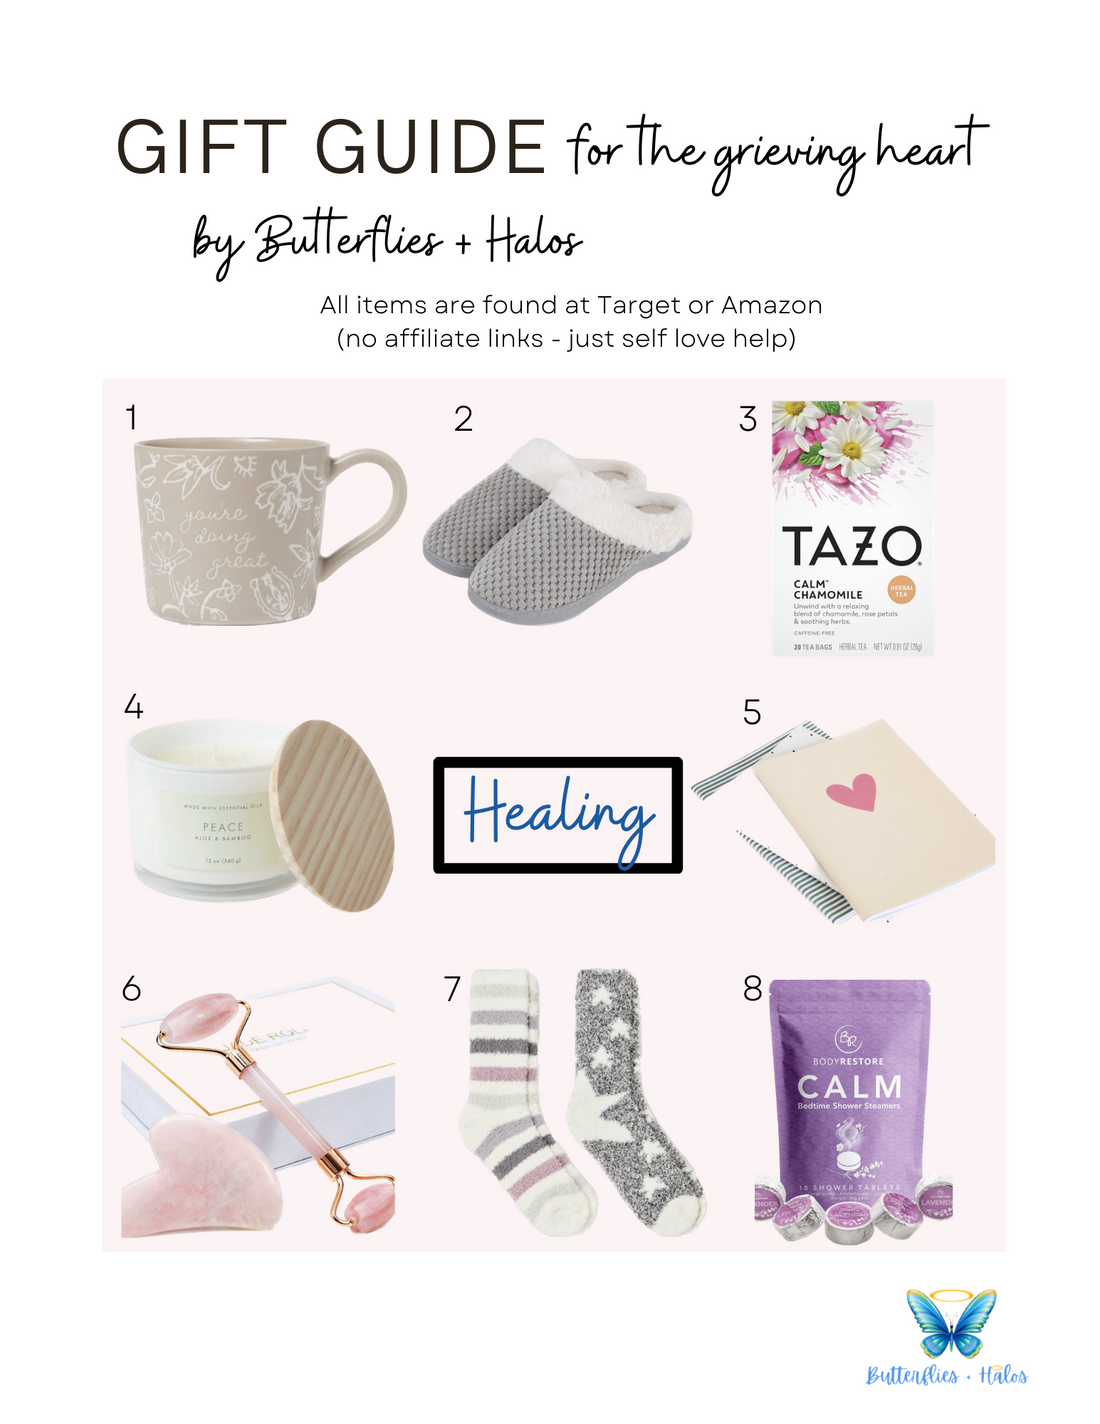 Gift Guide for the grieving heart